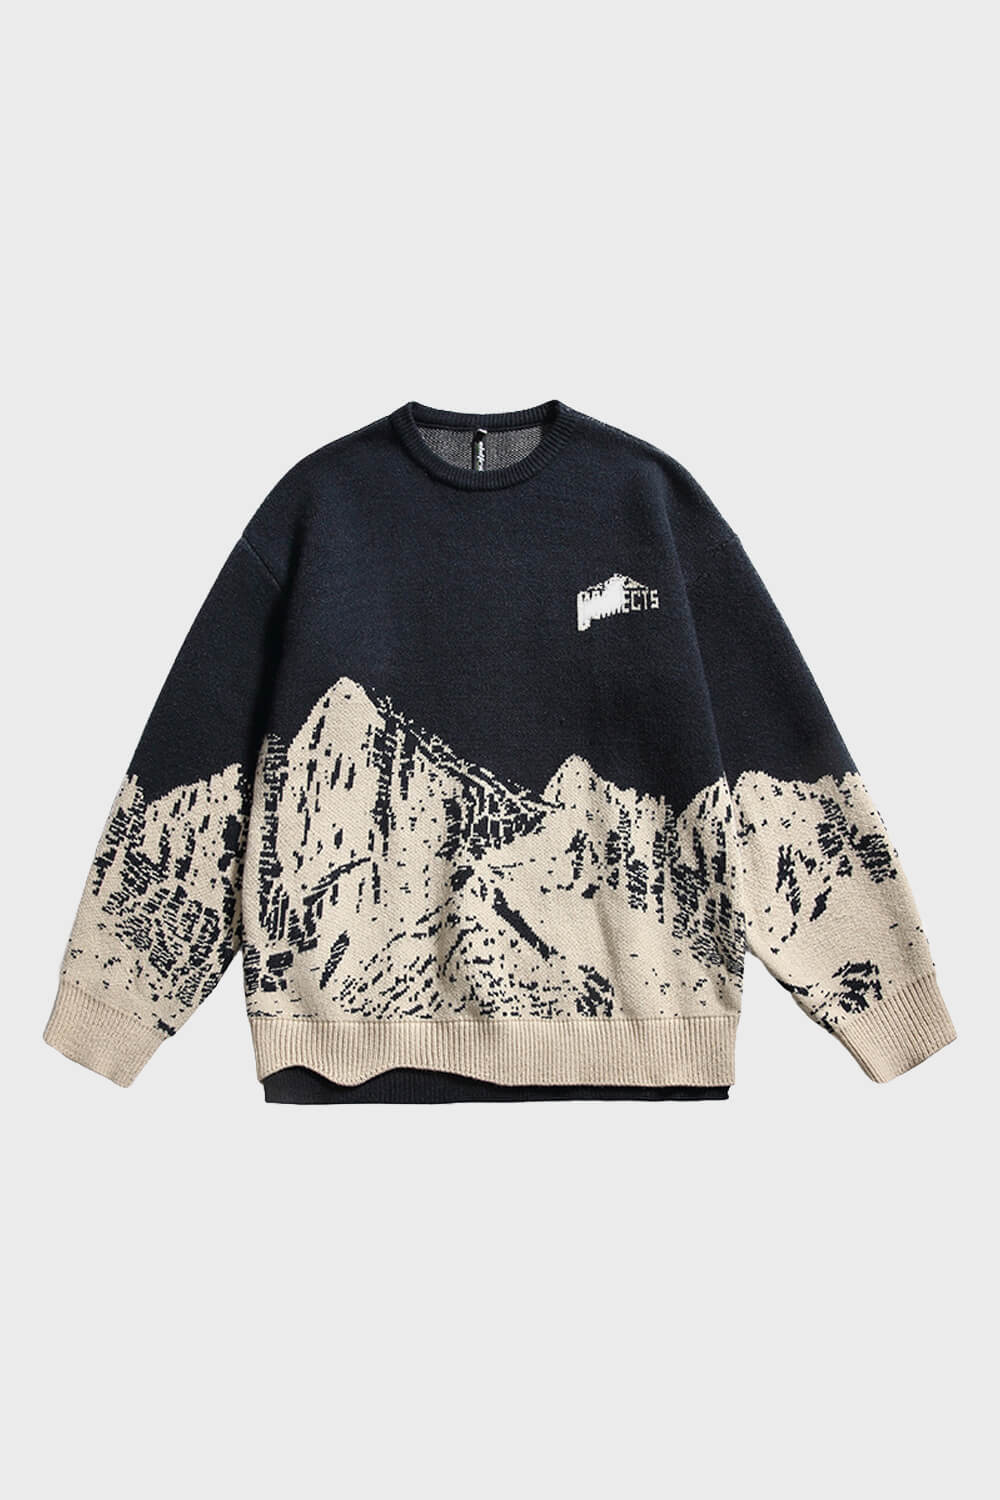 That Year That Mountain Contrast Sweater